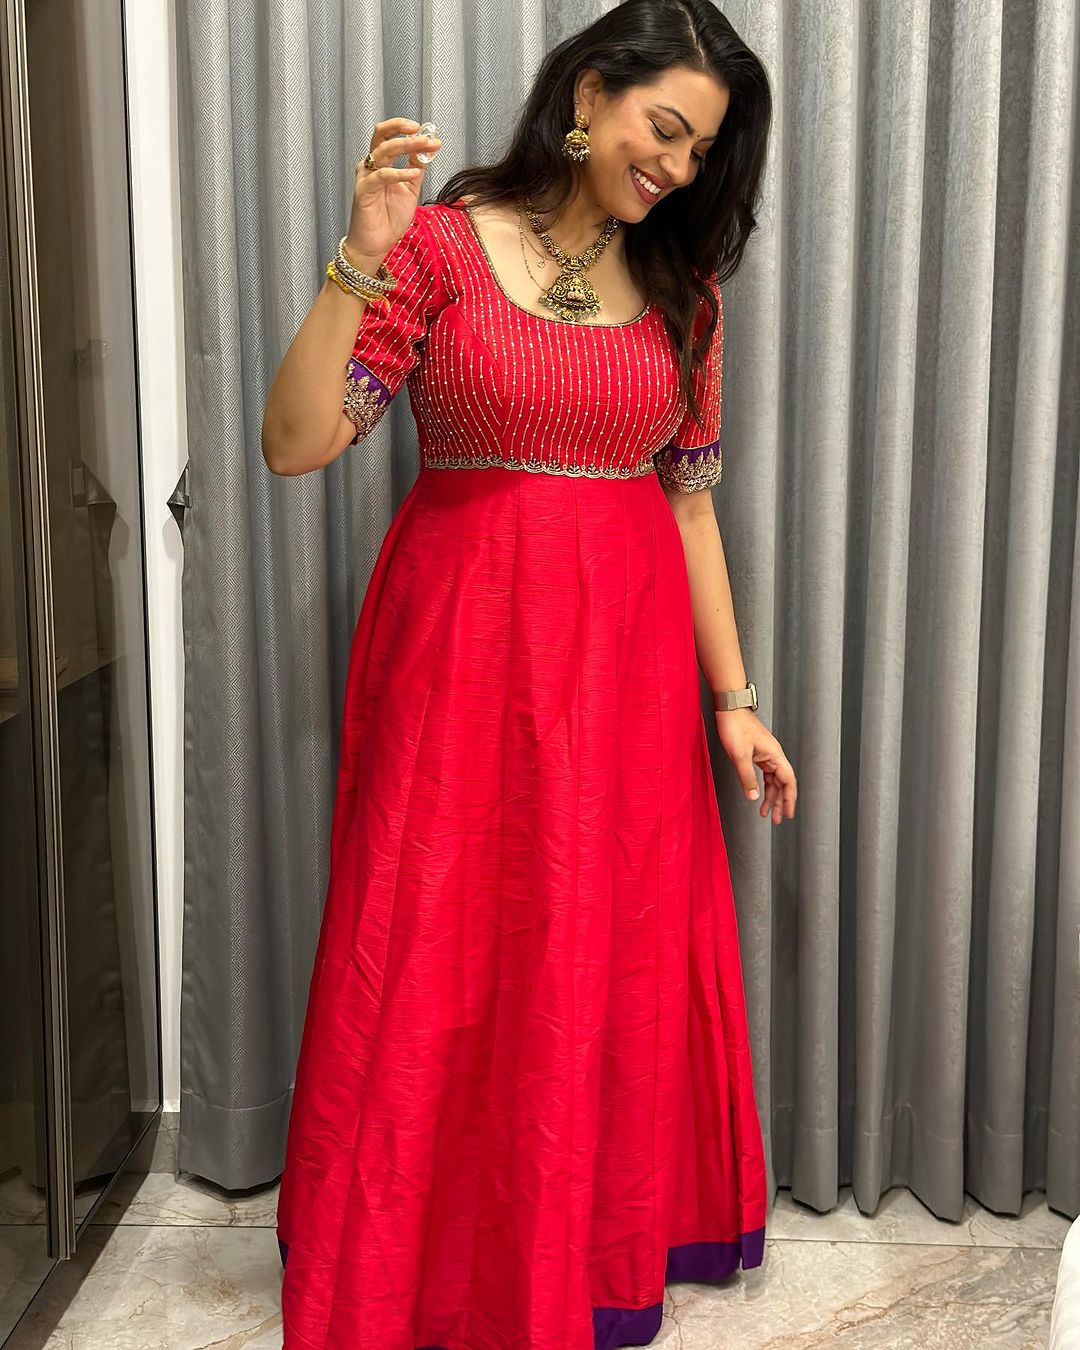 Singer geetha madhuri extremely glamorous in this images-Actressgeetha, Geetha Madhuri, Geethamadhuri Photos,Spicy Hot Pics,Images,High Resolution WallPapers Download